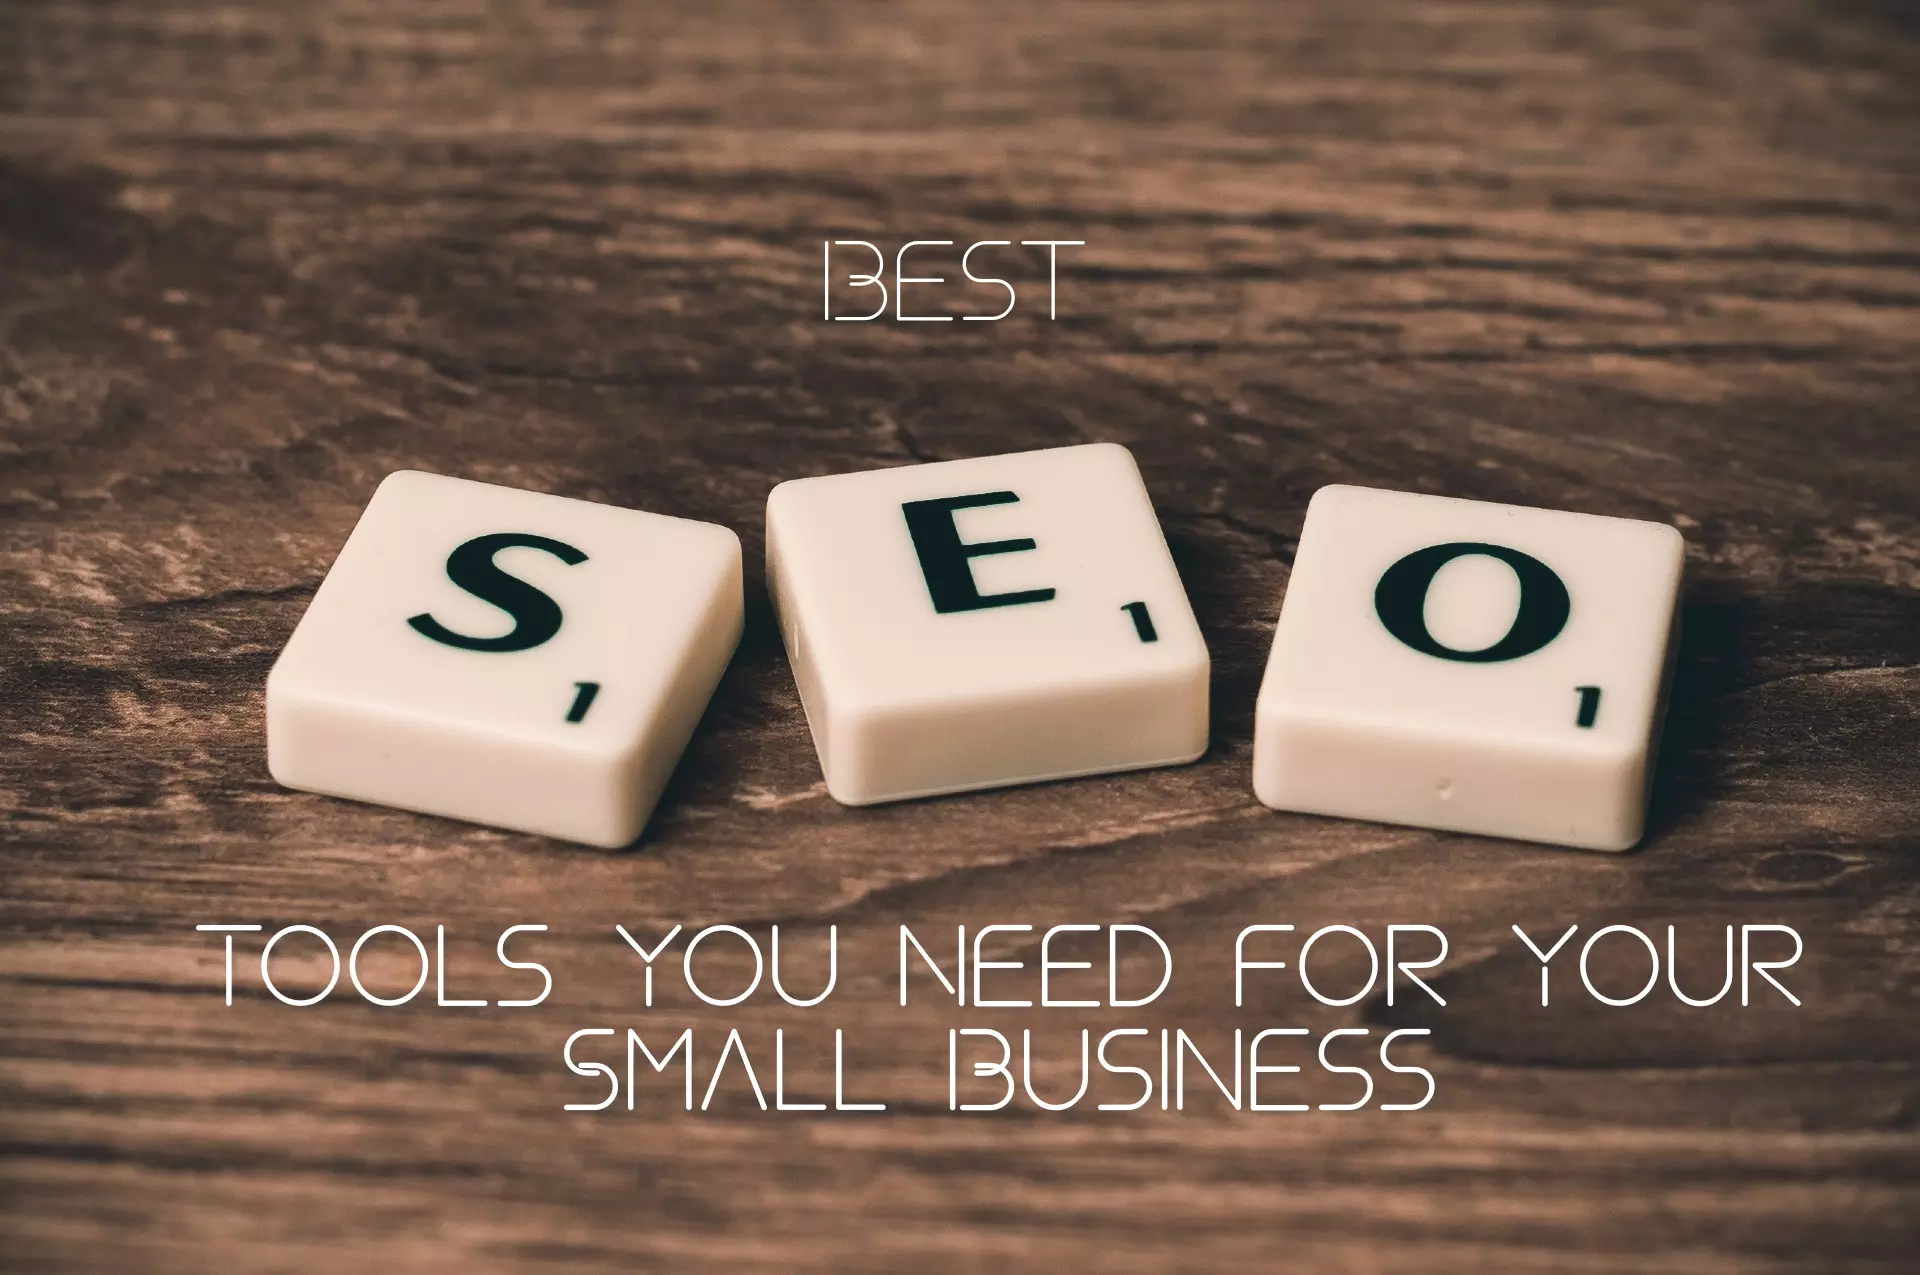 Best-Seo-Tools-You-Need-For-Your-Small-Business